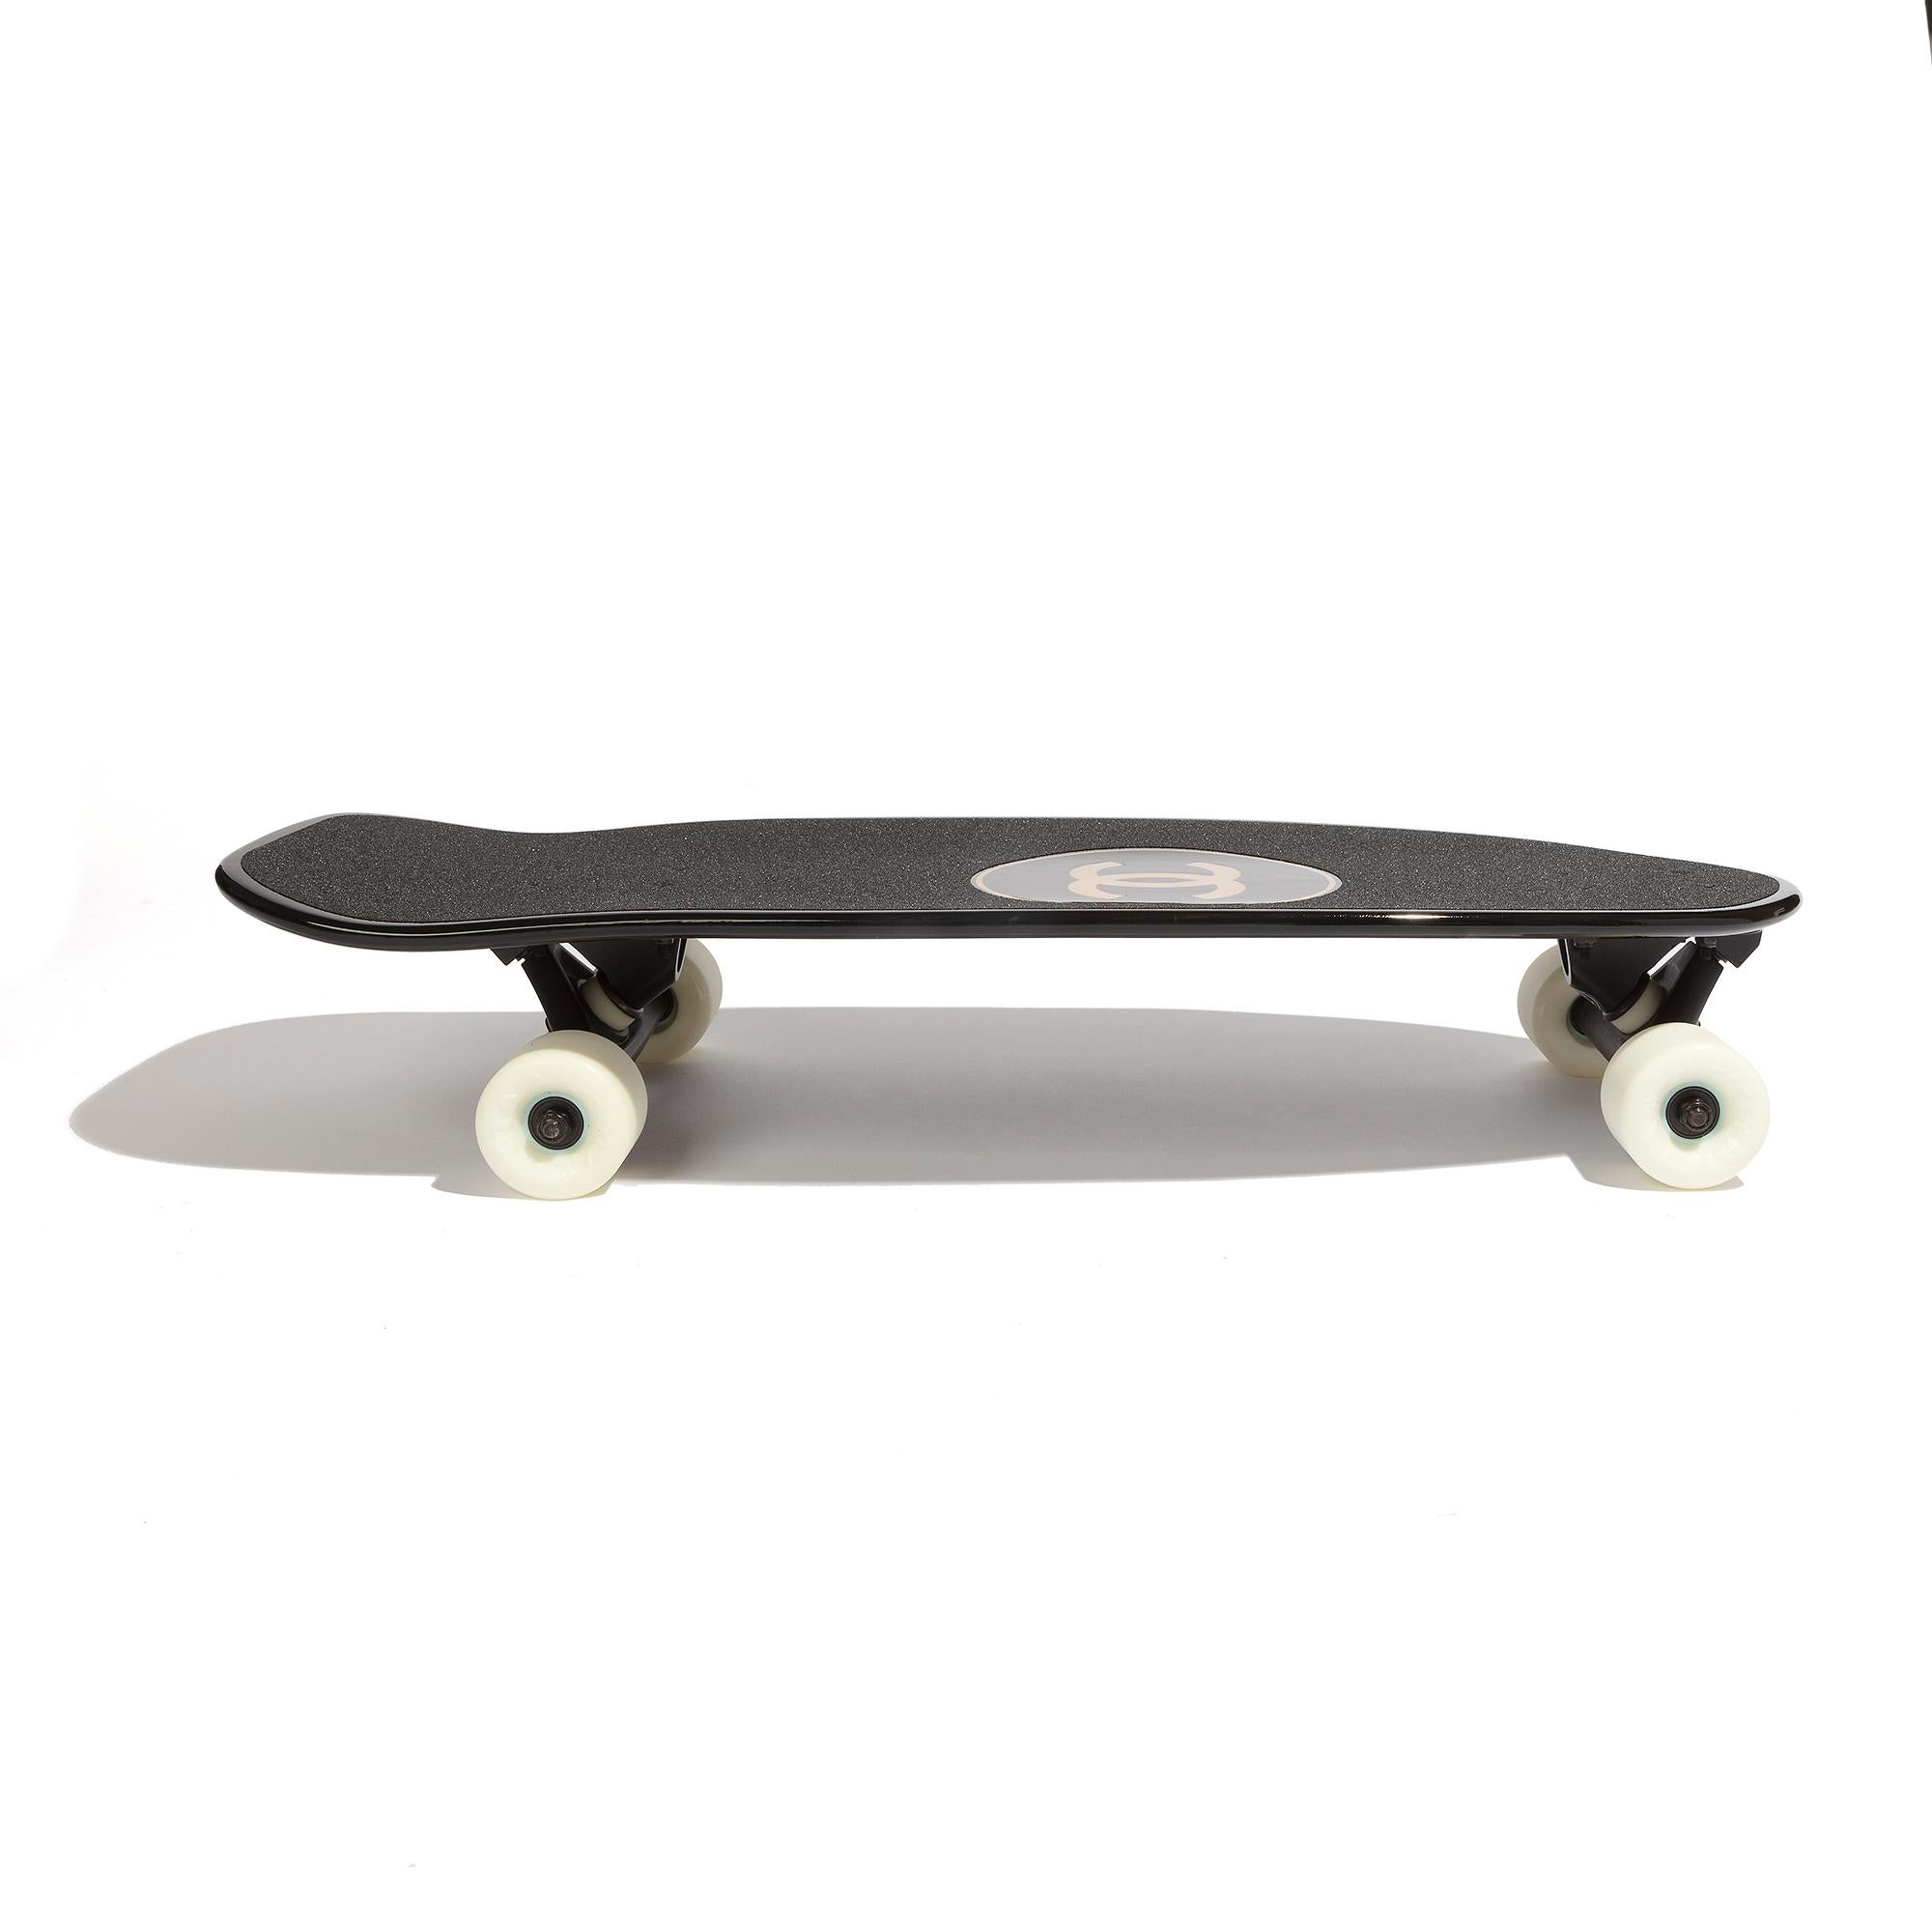 Women's or Men's Limited Edition 2019 Skateboard For Sale